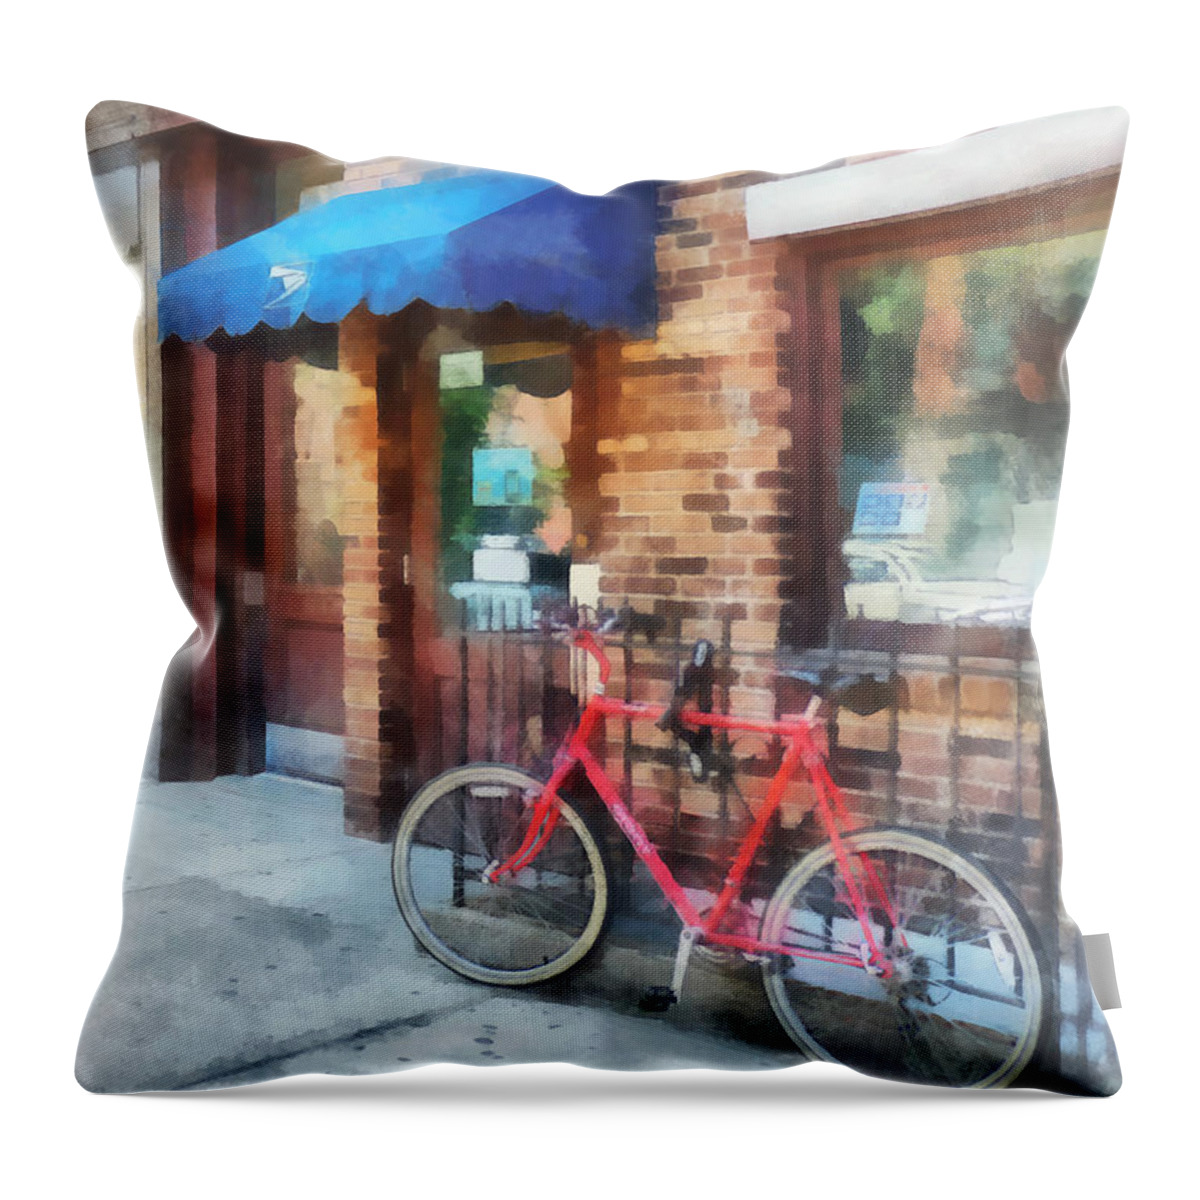 Bicycle Throw Pillow featuring the photograph Hoboken NJ - Bicycle By Post Office by Susan Savad